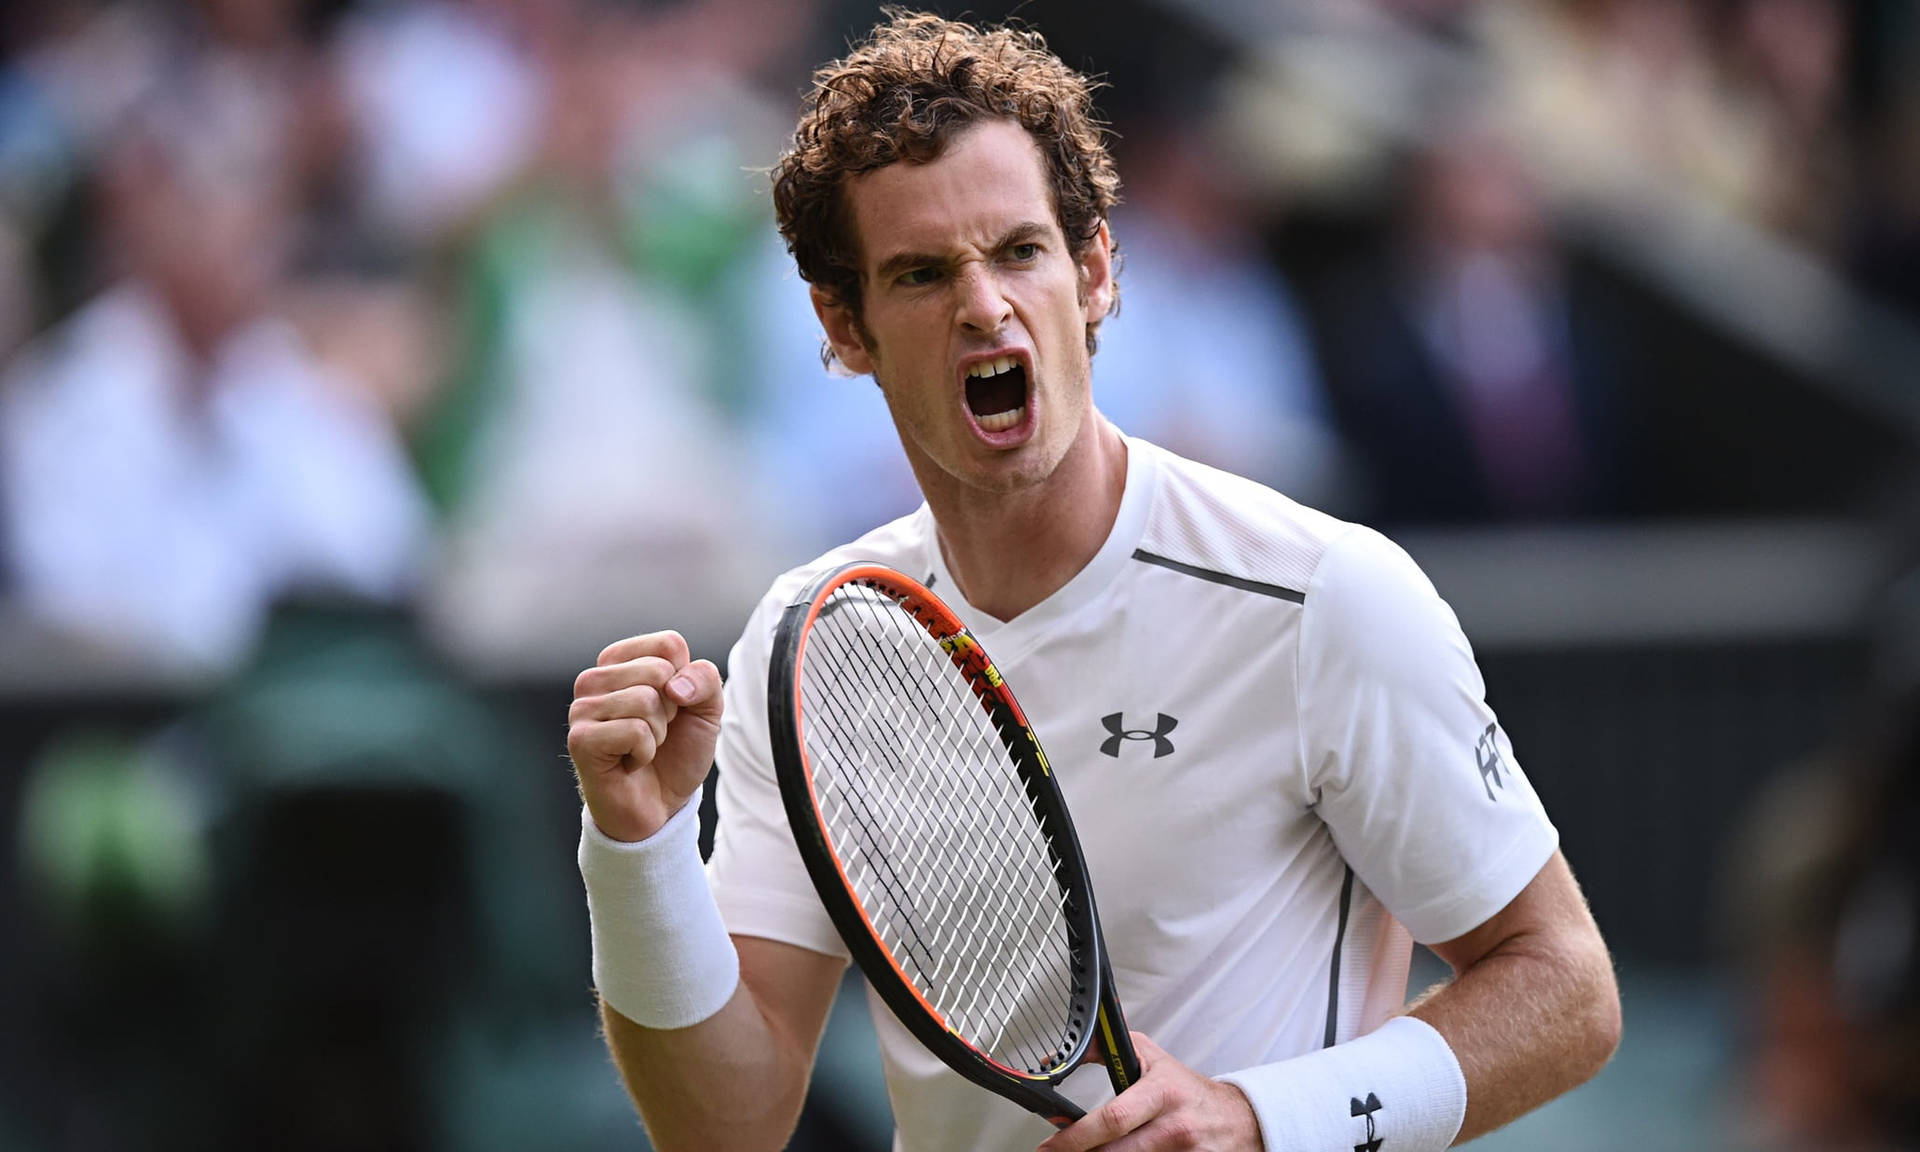 Andy Murray Passionately Celebrating A Victorious Moment